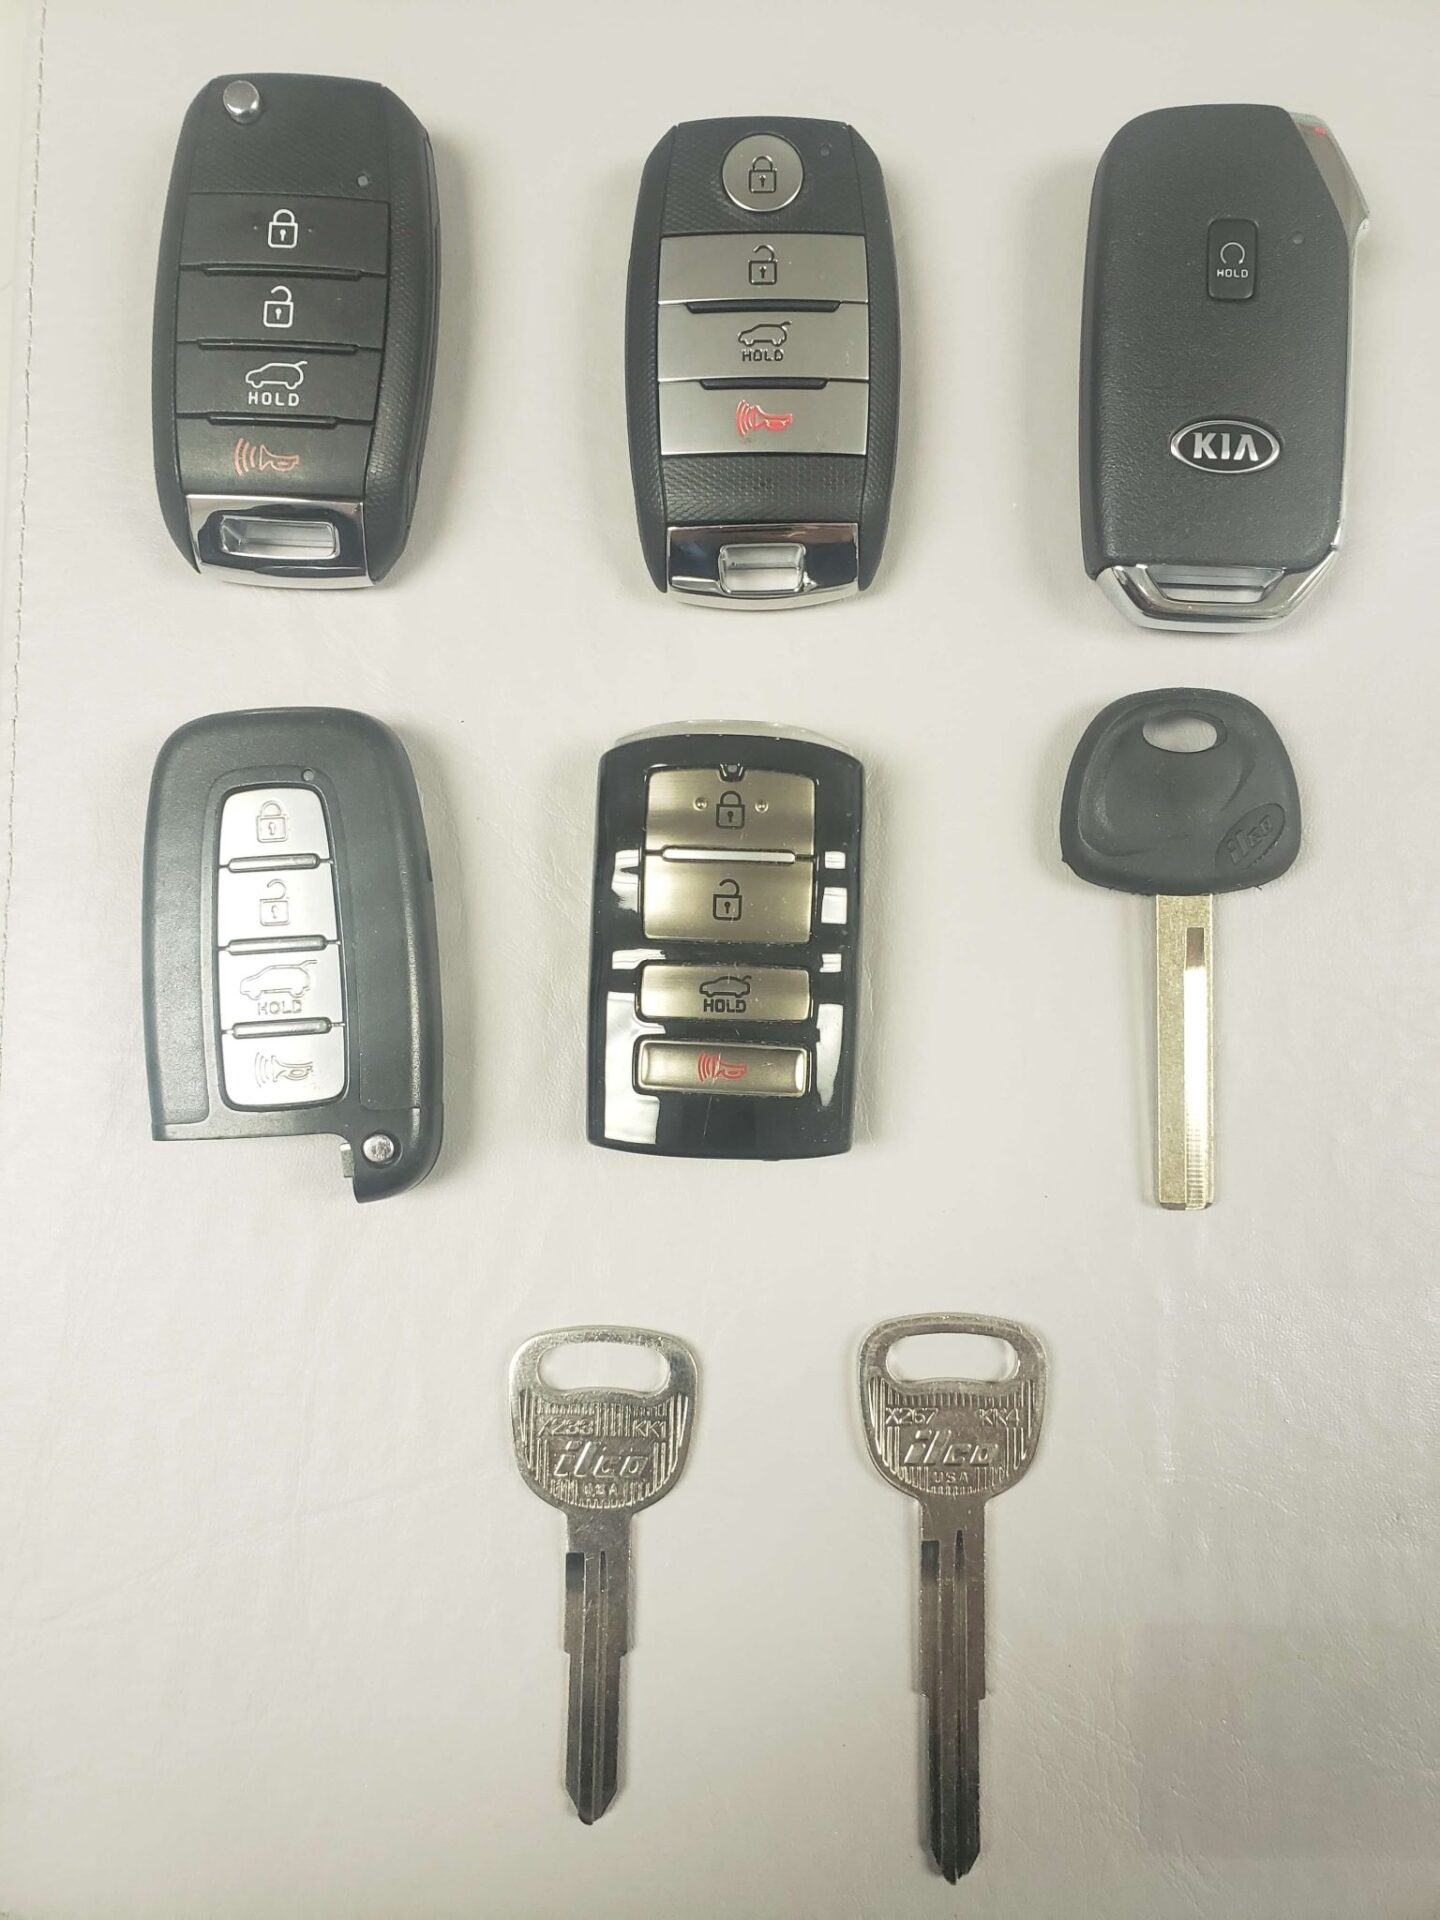 Kia Rio Replacement Keys What To Do, Options, Cost & More